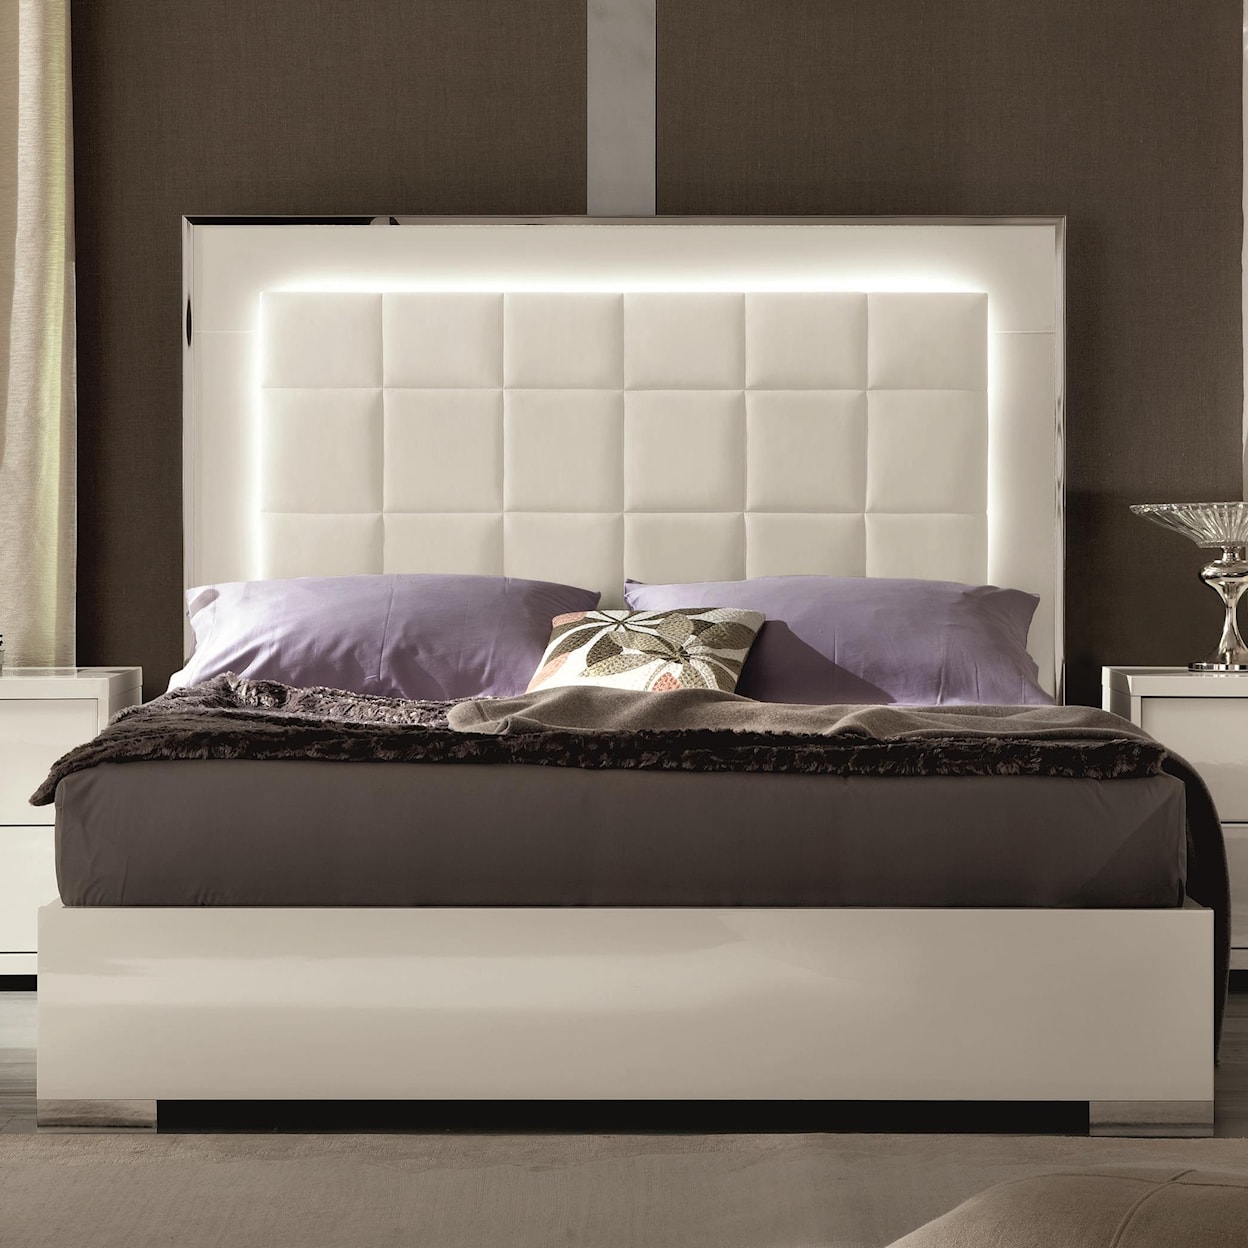 Alf Italia Imperia King UPH Bed w/ LED Lights and FB Storage